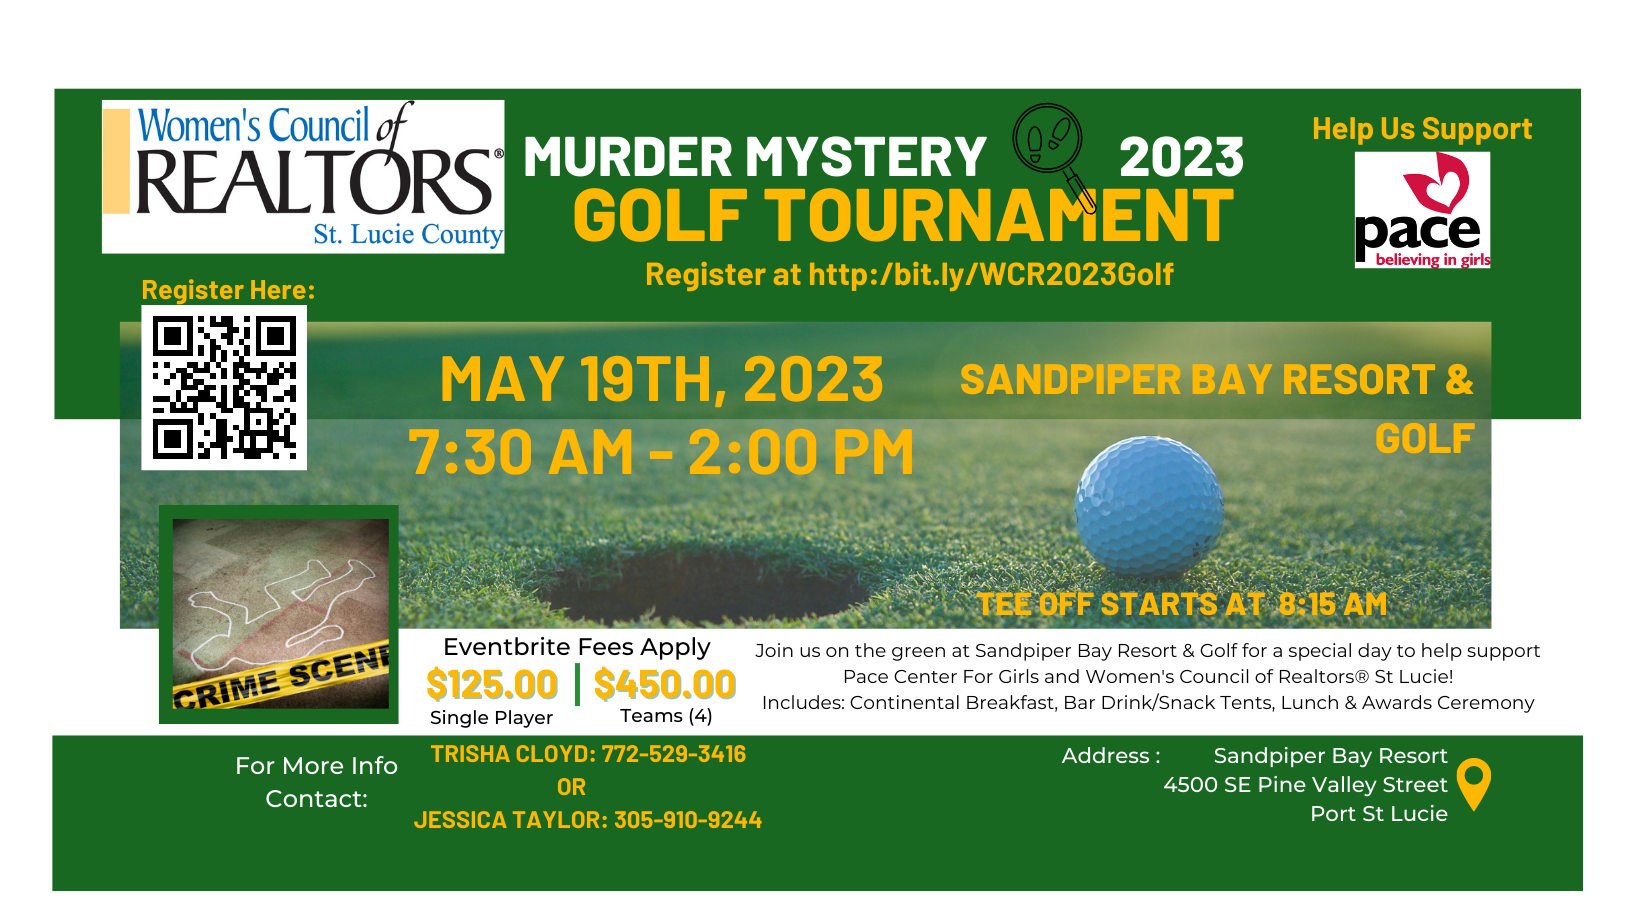 The 19th Hole Murder Mystery Golf Tournament